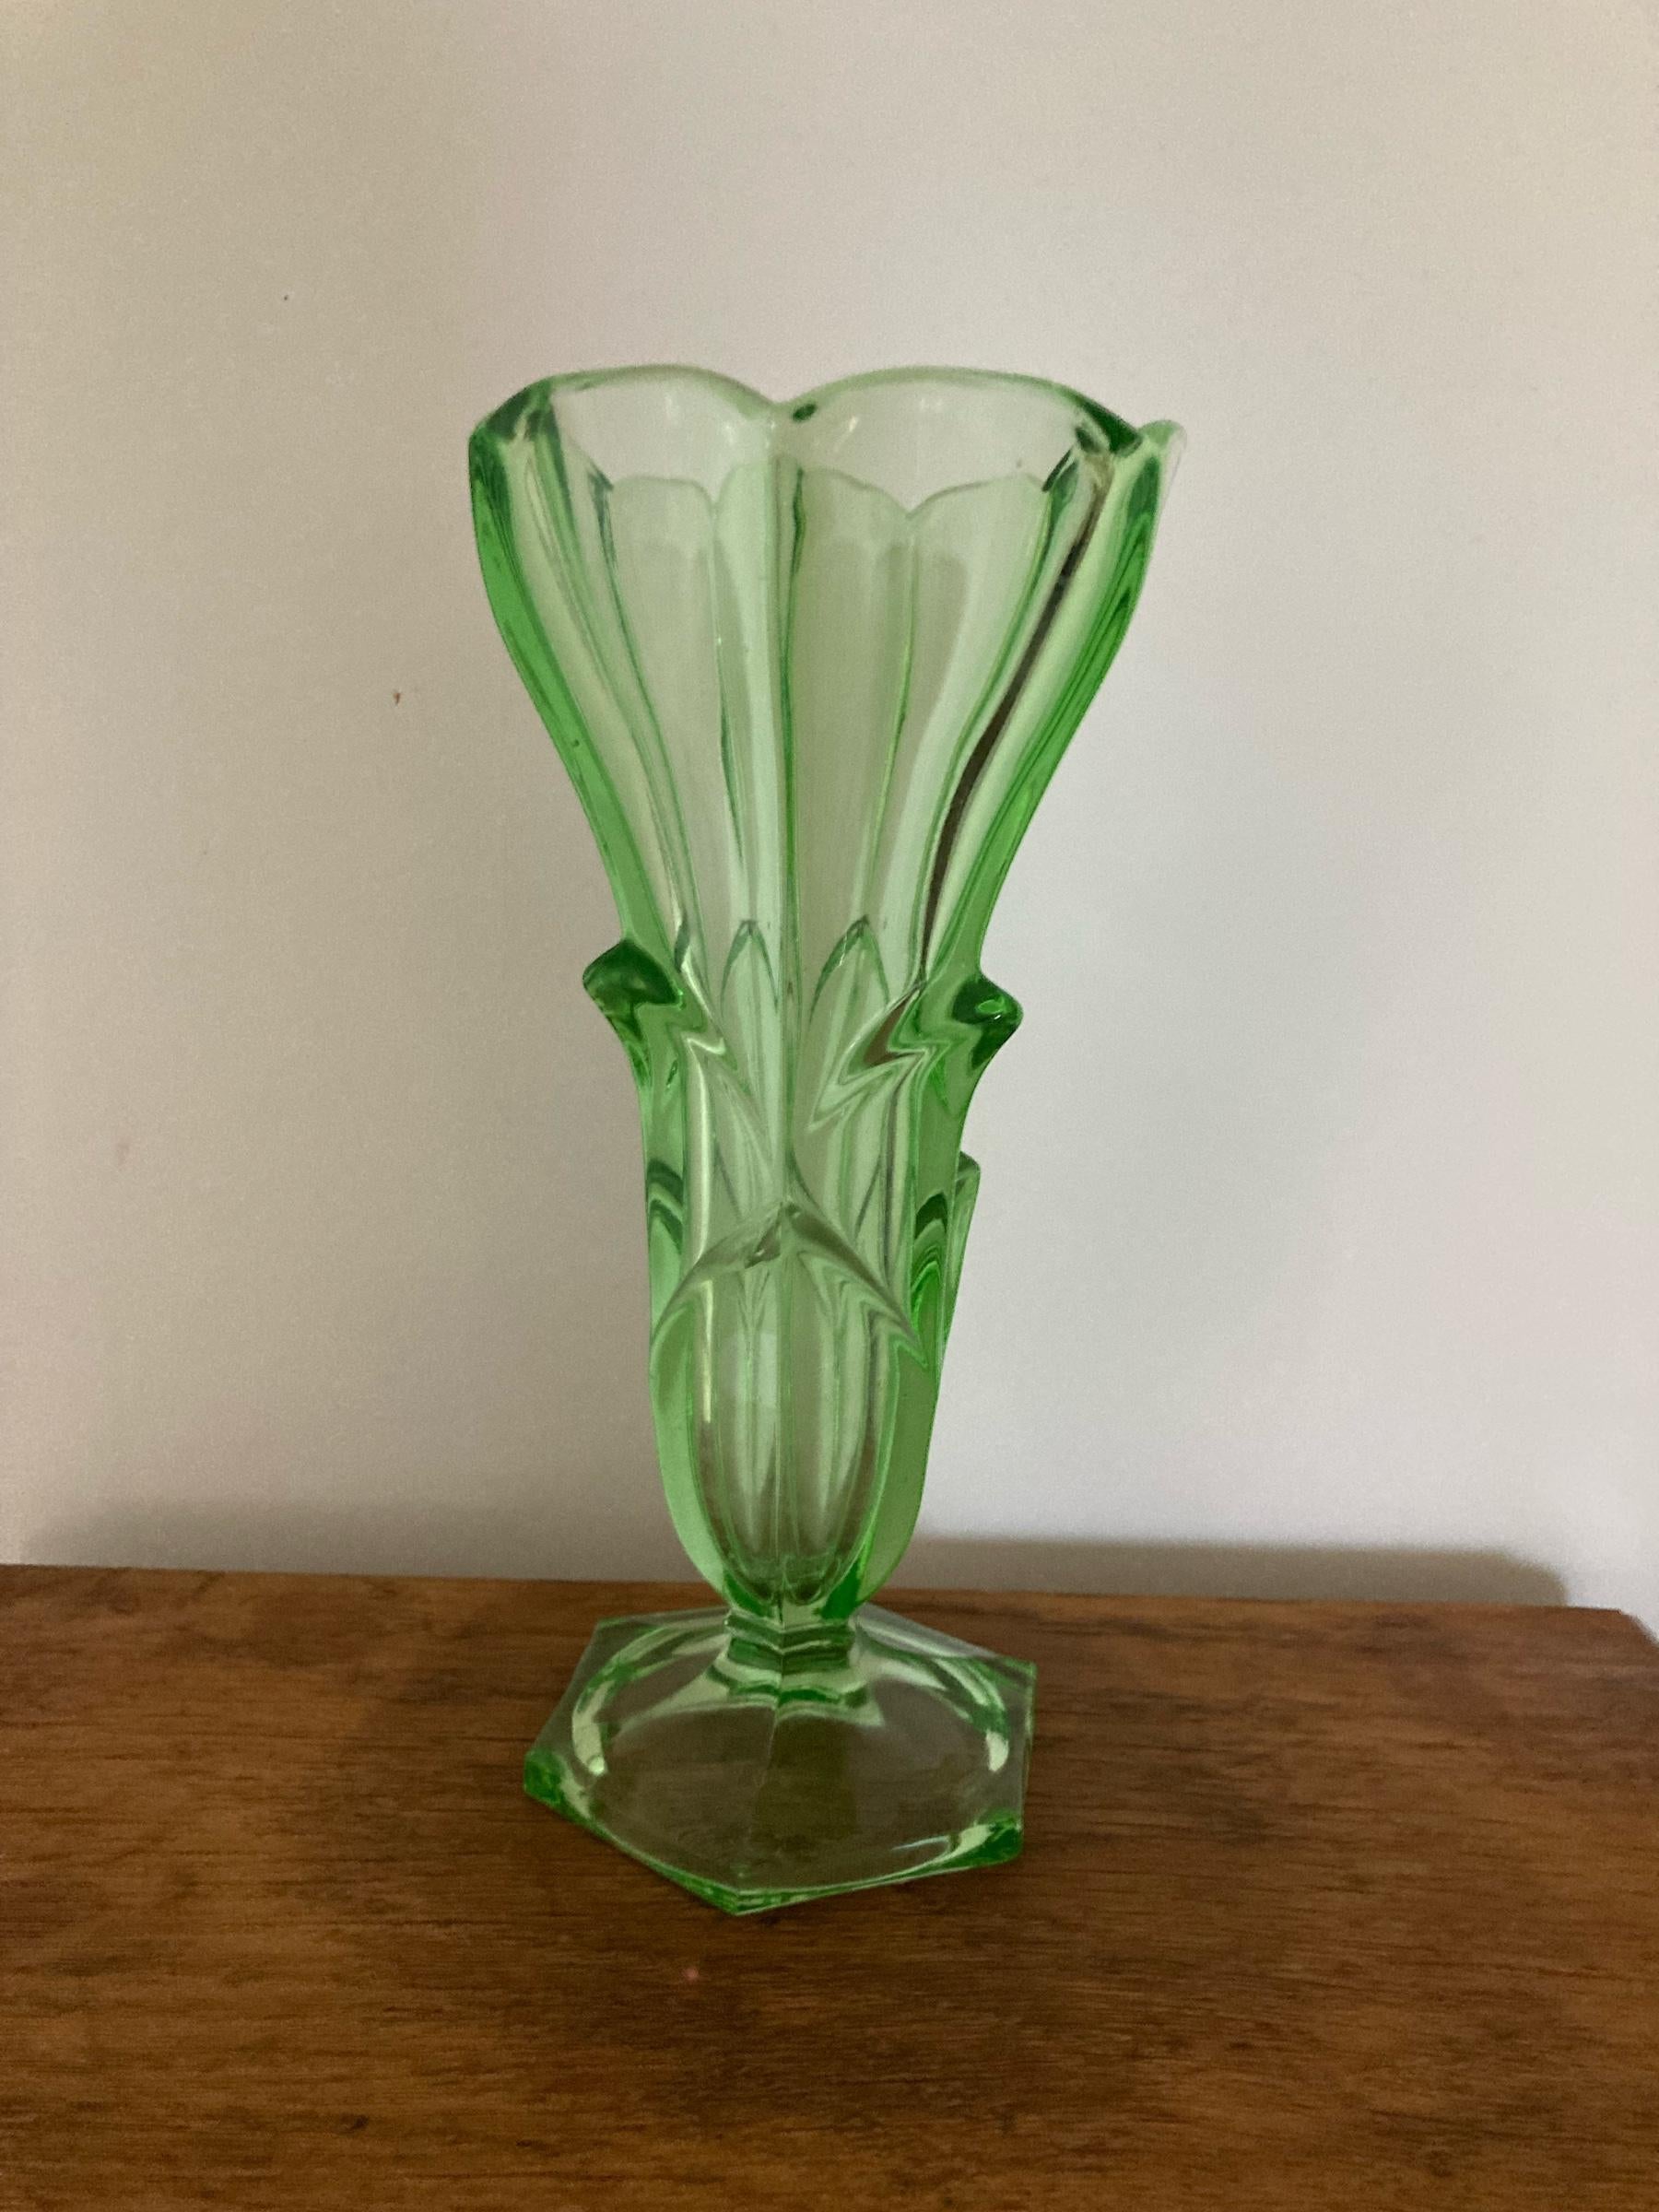 An exquisite green uranium glass vase with a captivating flower design In Excellent Condition For Sale In Bishop's Stortford, GB